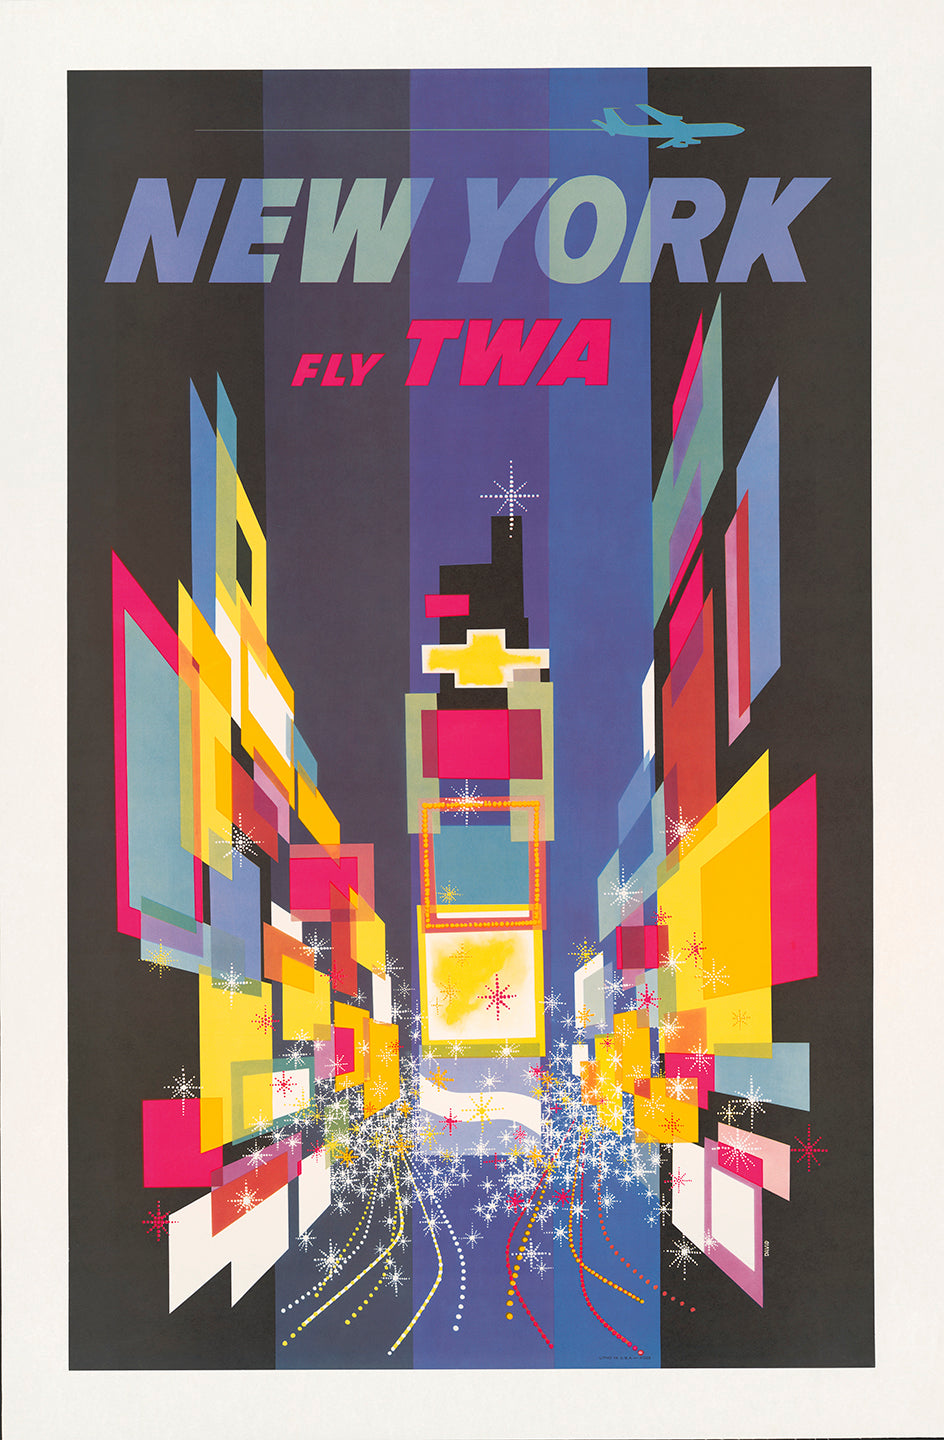 Two TWA Airline Mid-Century Travel Posters, New York and Las Vegas